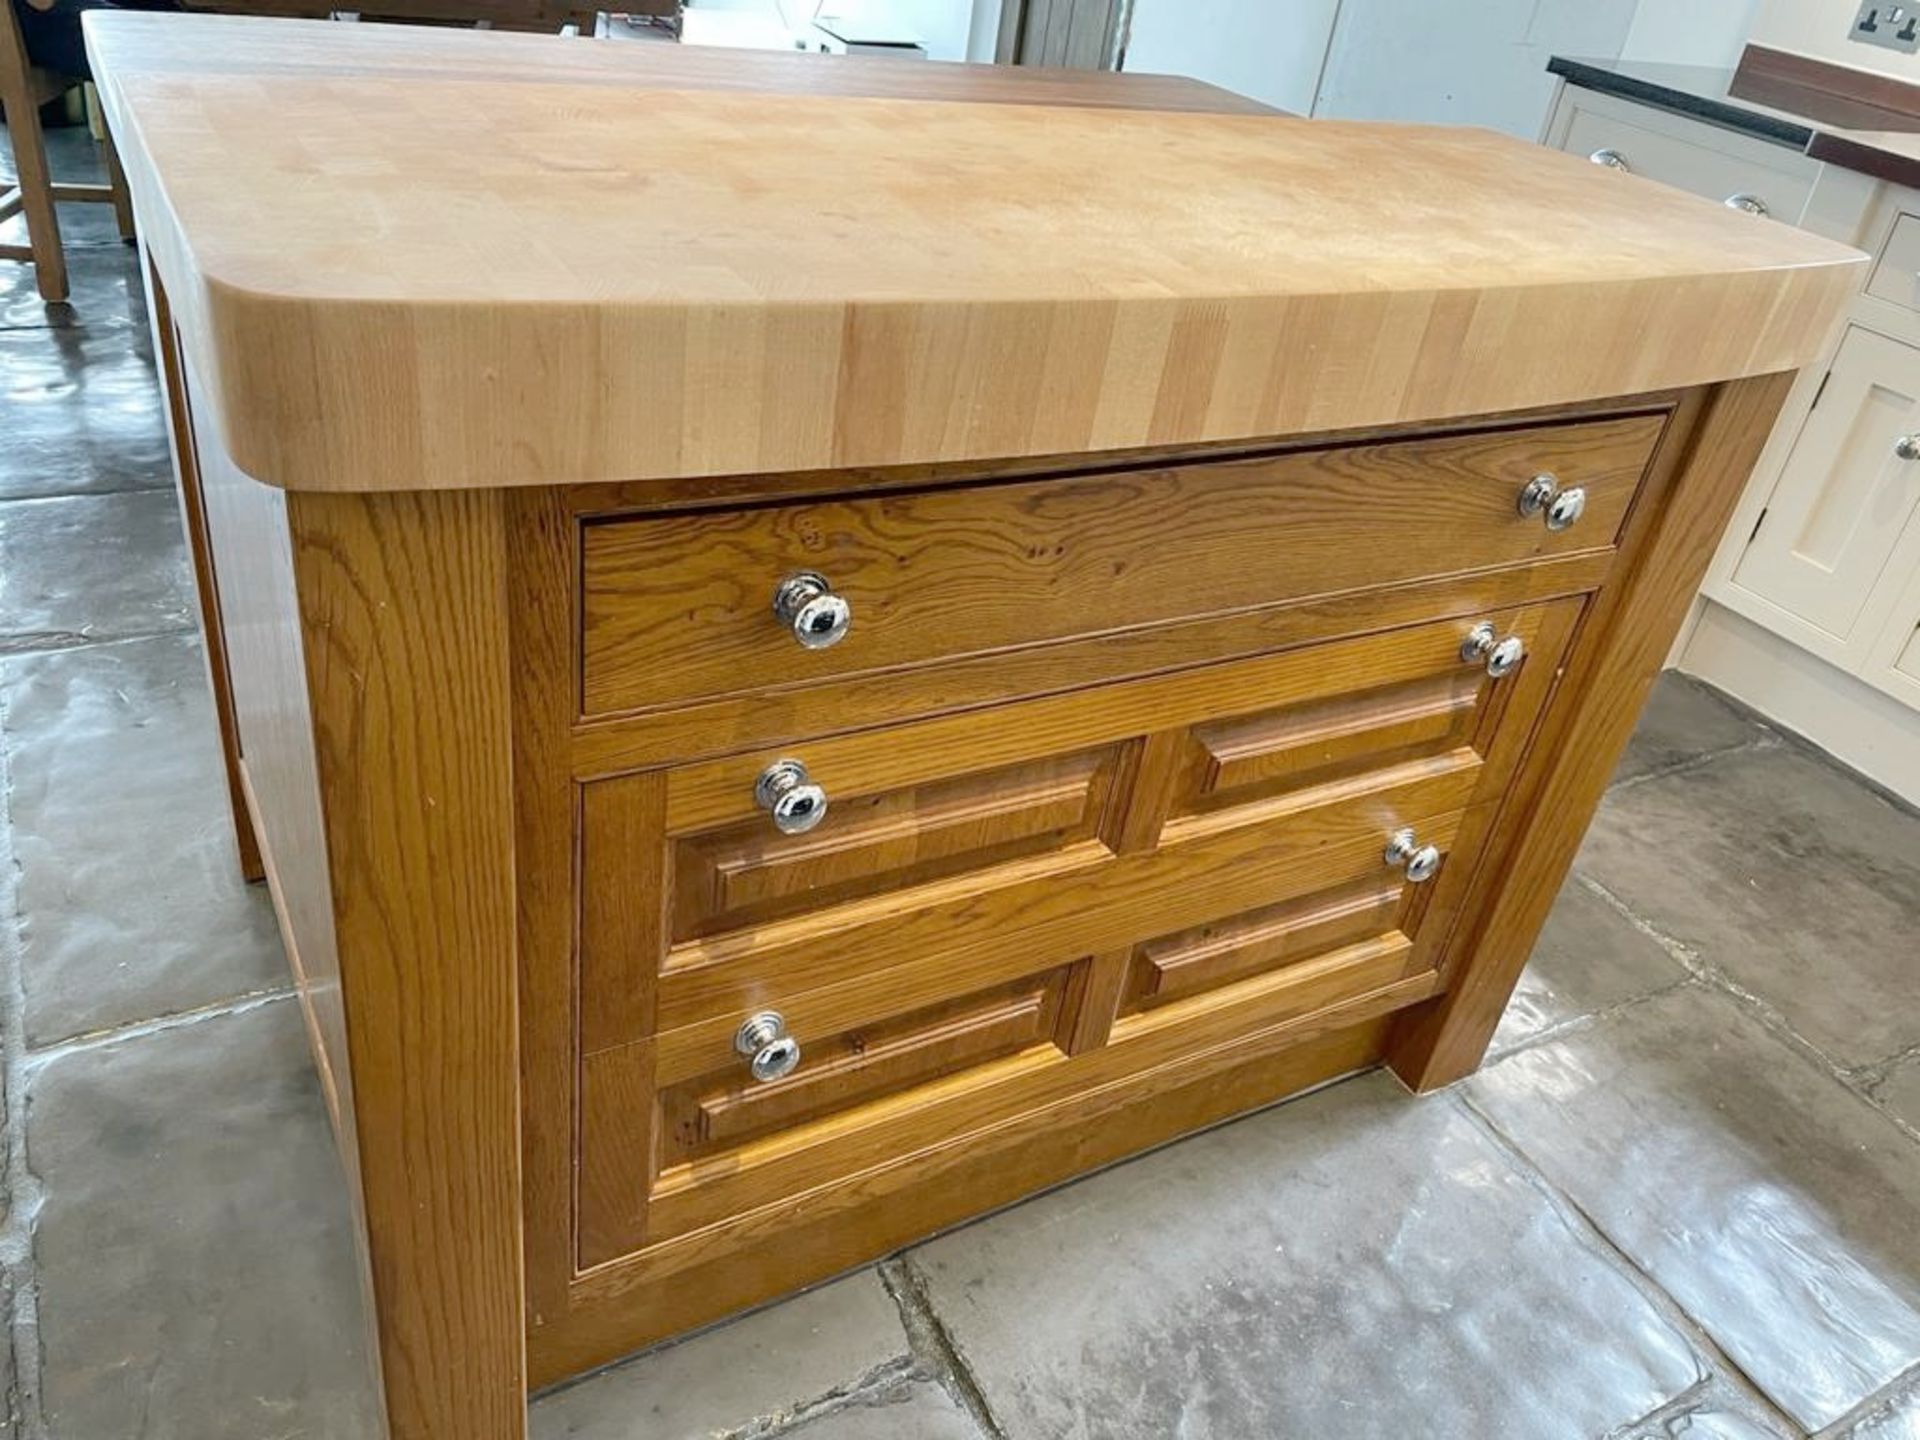 1 x Rustic Solid Wood French Country Kitchen Island With Drawers, Wine Racking + Chopping Block Top - Image 3 of 14